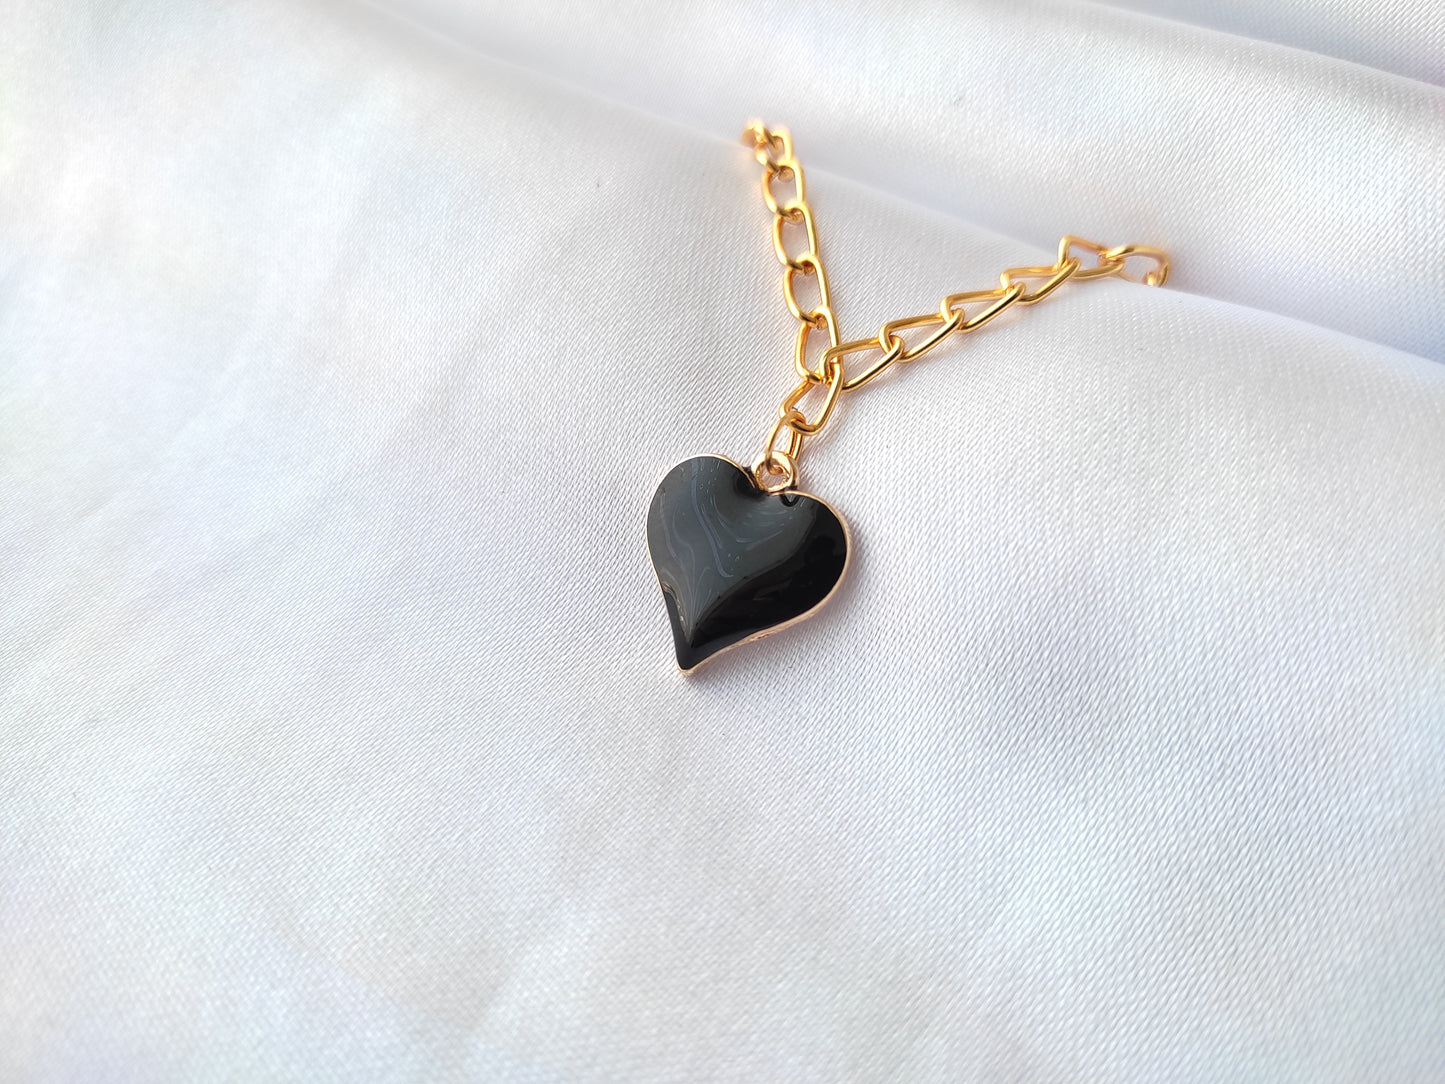 Pretty cute solid heart shaped charm chain bracelet for women and girls